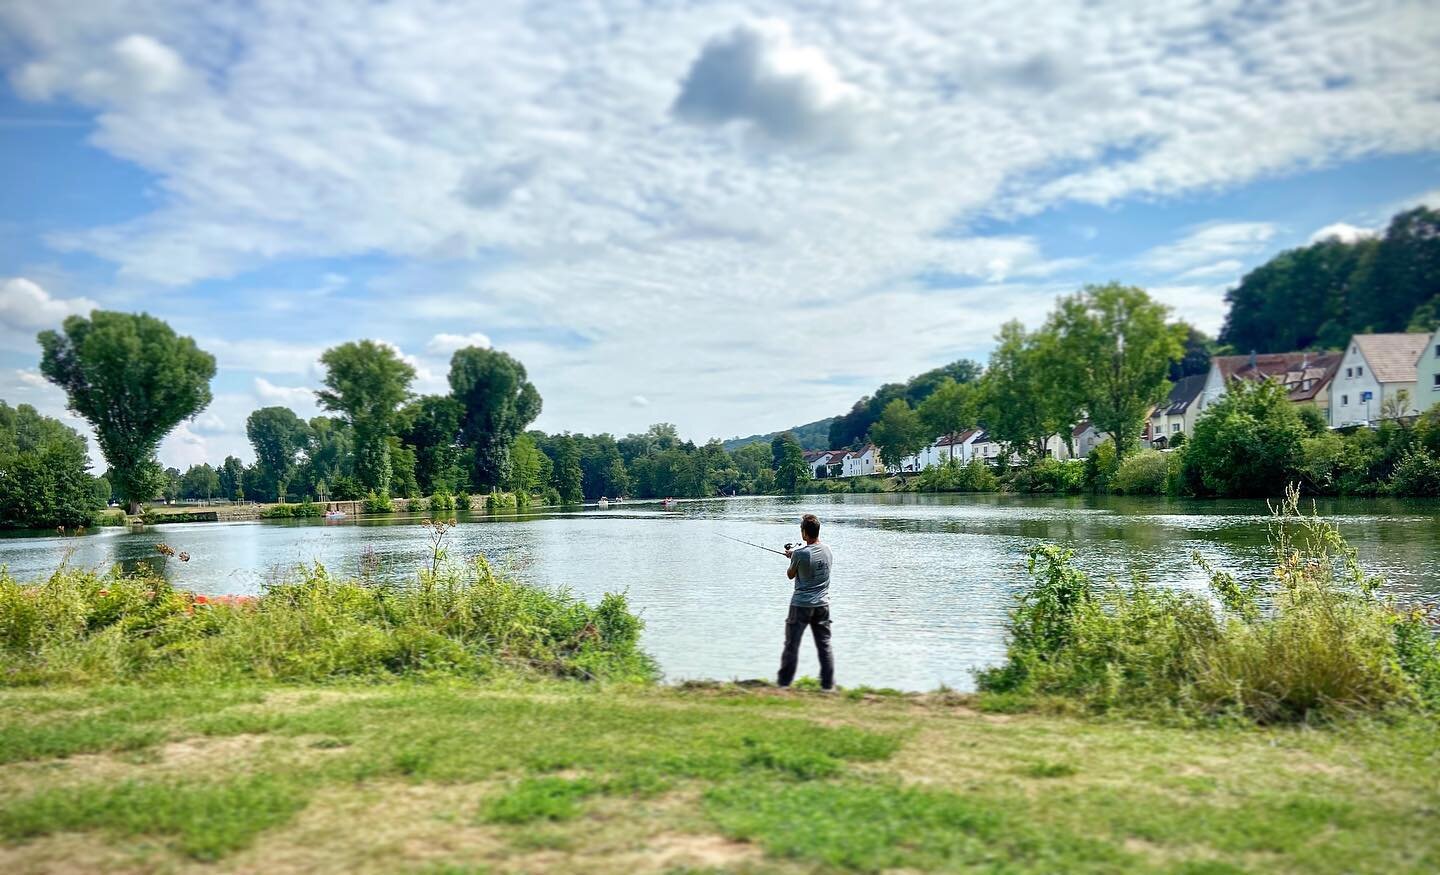 Throwback to few weeks ago, cycling the endless paths and green spaces around Bamberg, with a brief stop to take in the scenery and watch this weird dude simultaneously fish, smoke and yell at his dog (out of frame) every 3 seconds to stay put.
.
.
.